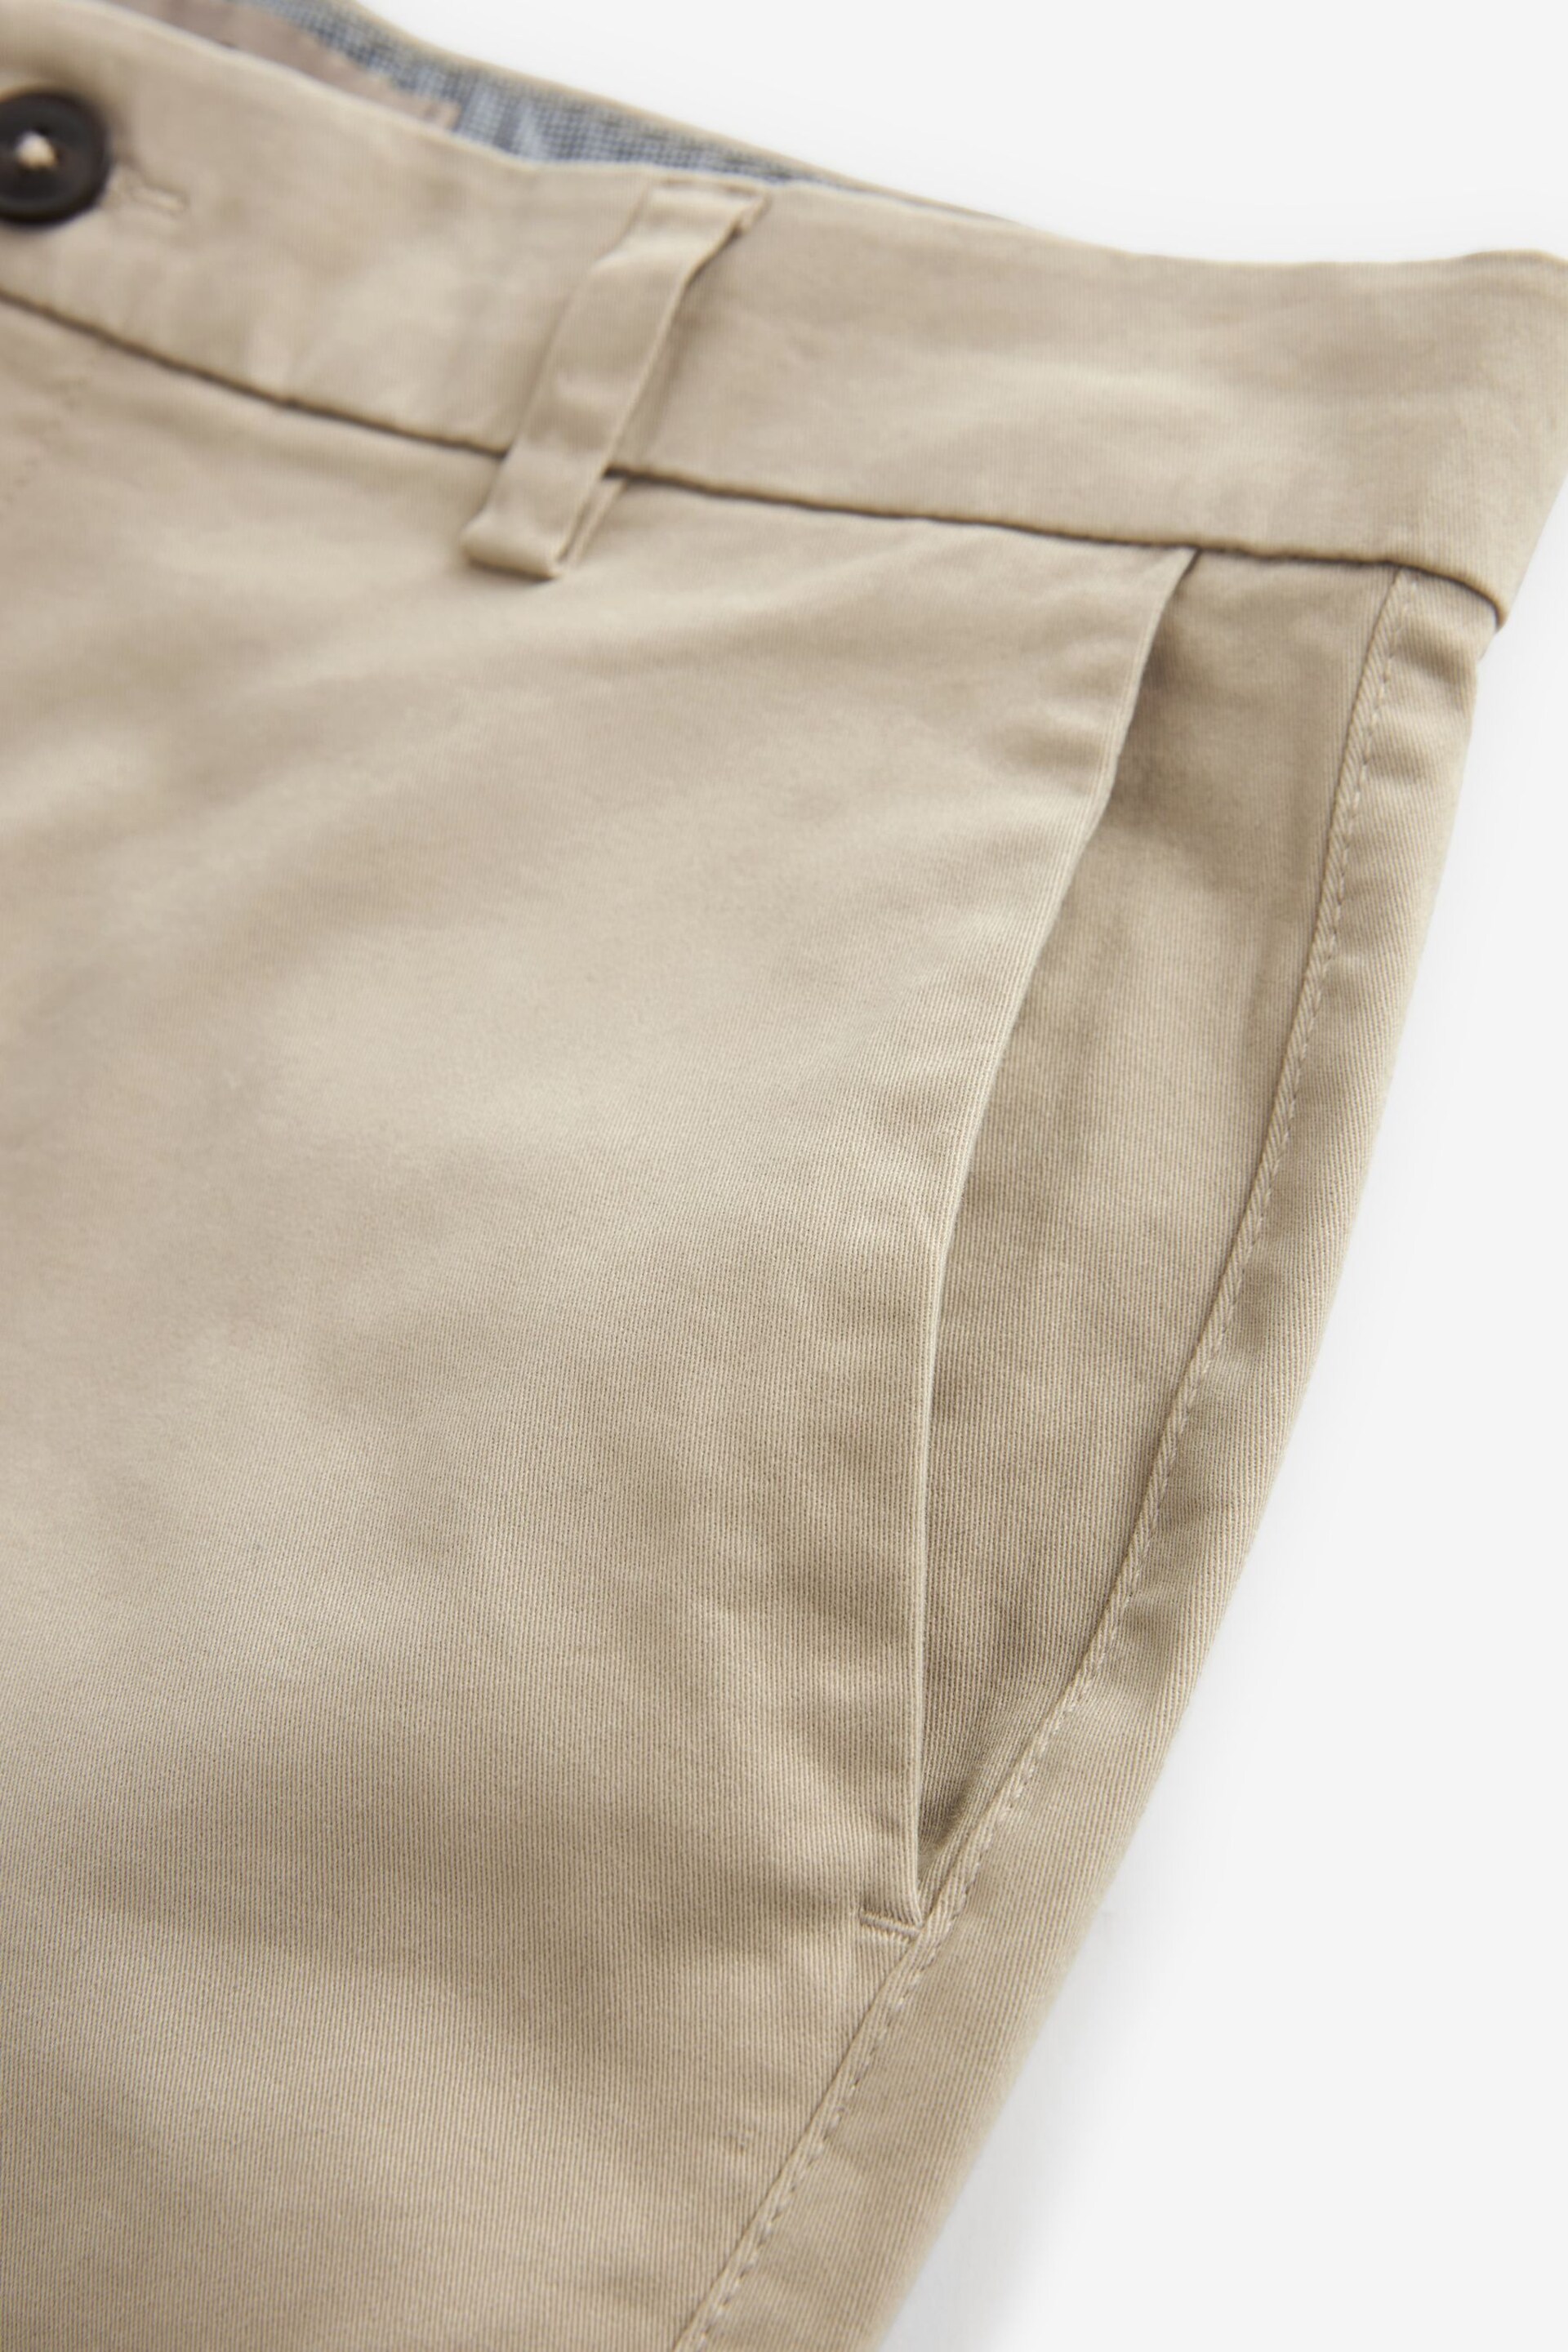 Stone Slim Fit Stretch Chinos Shorts - Image 8 of 9